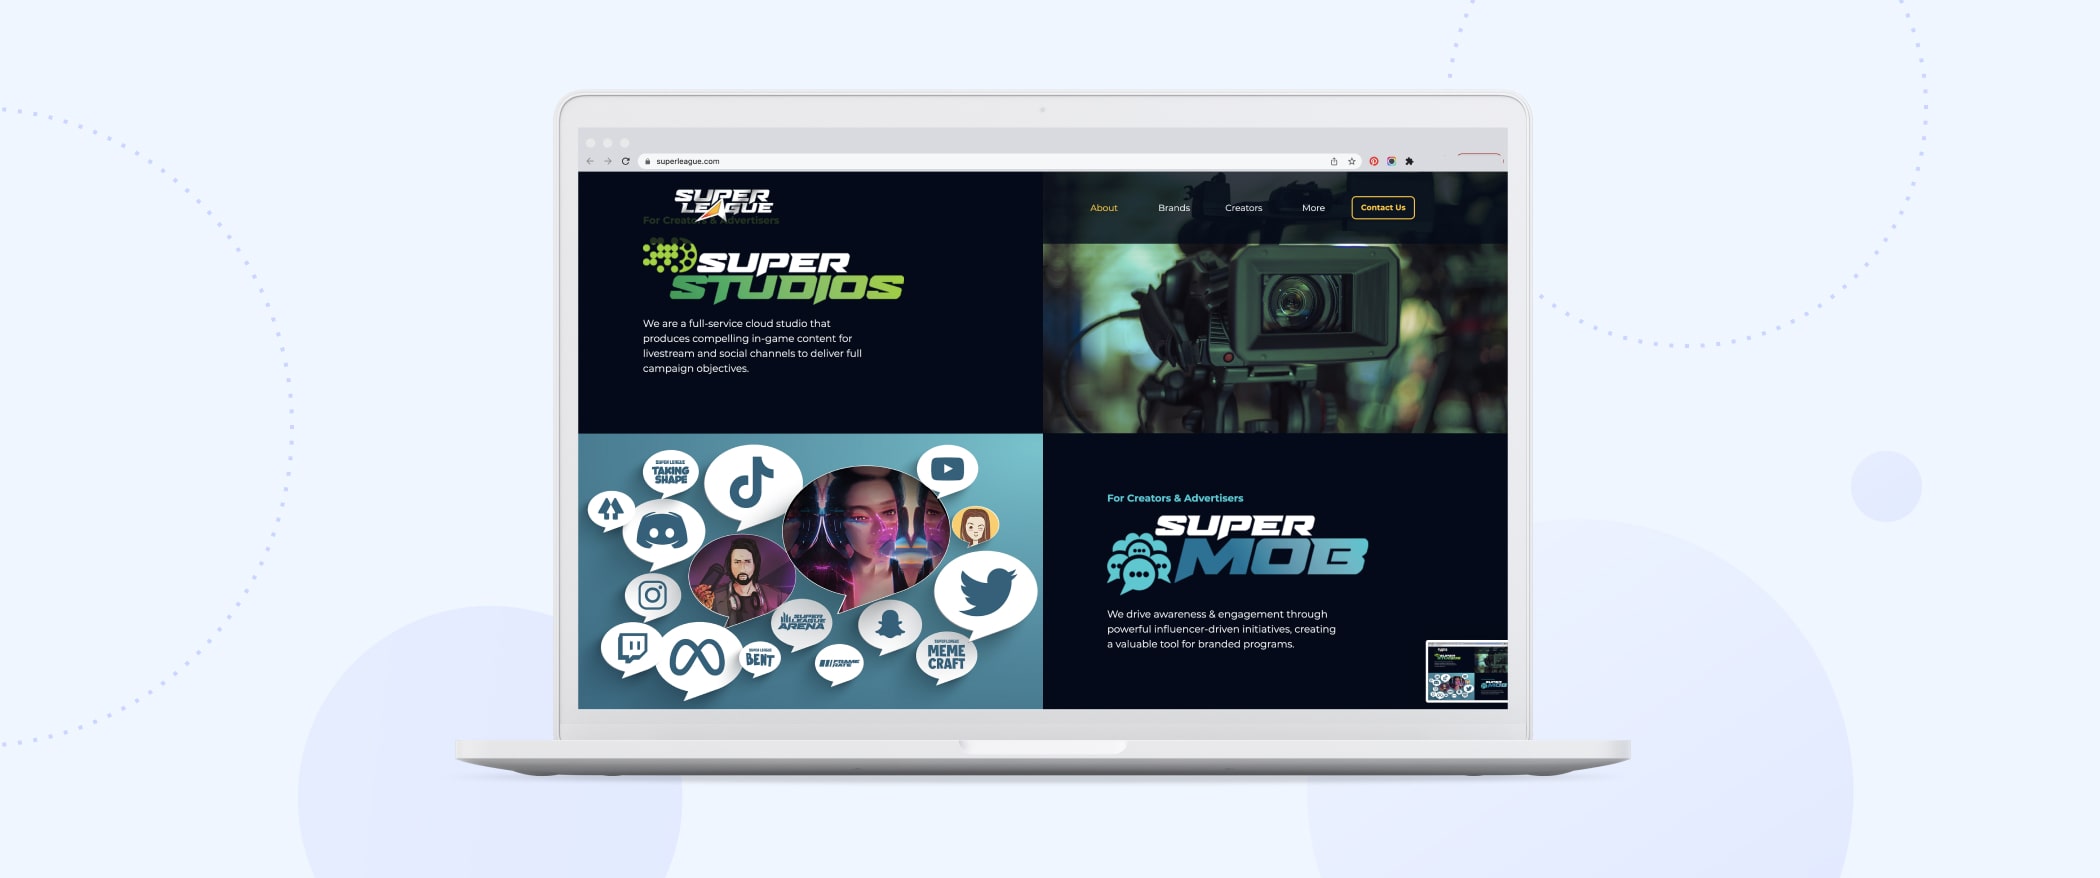 Super League Gaming in-game advertising company - Xenoss blog - In-Game Advertising